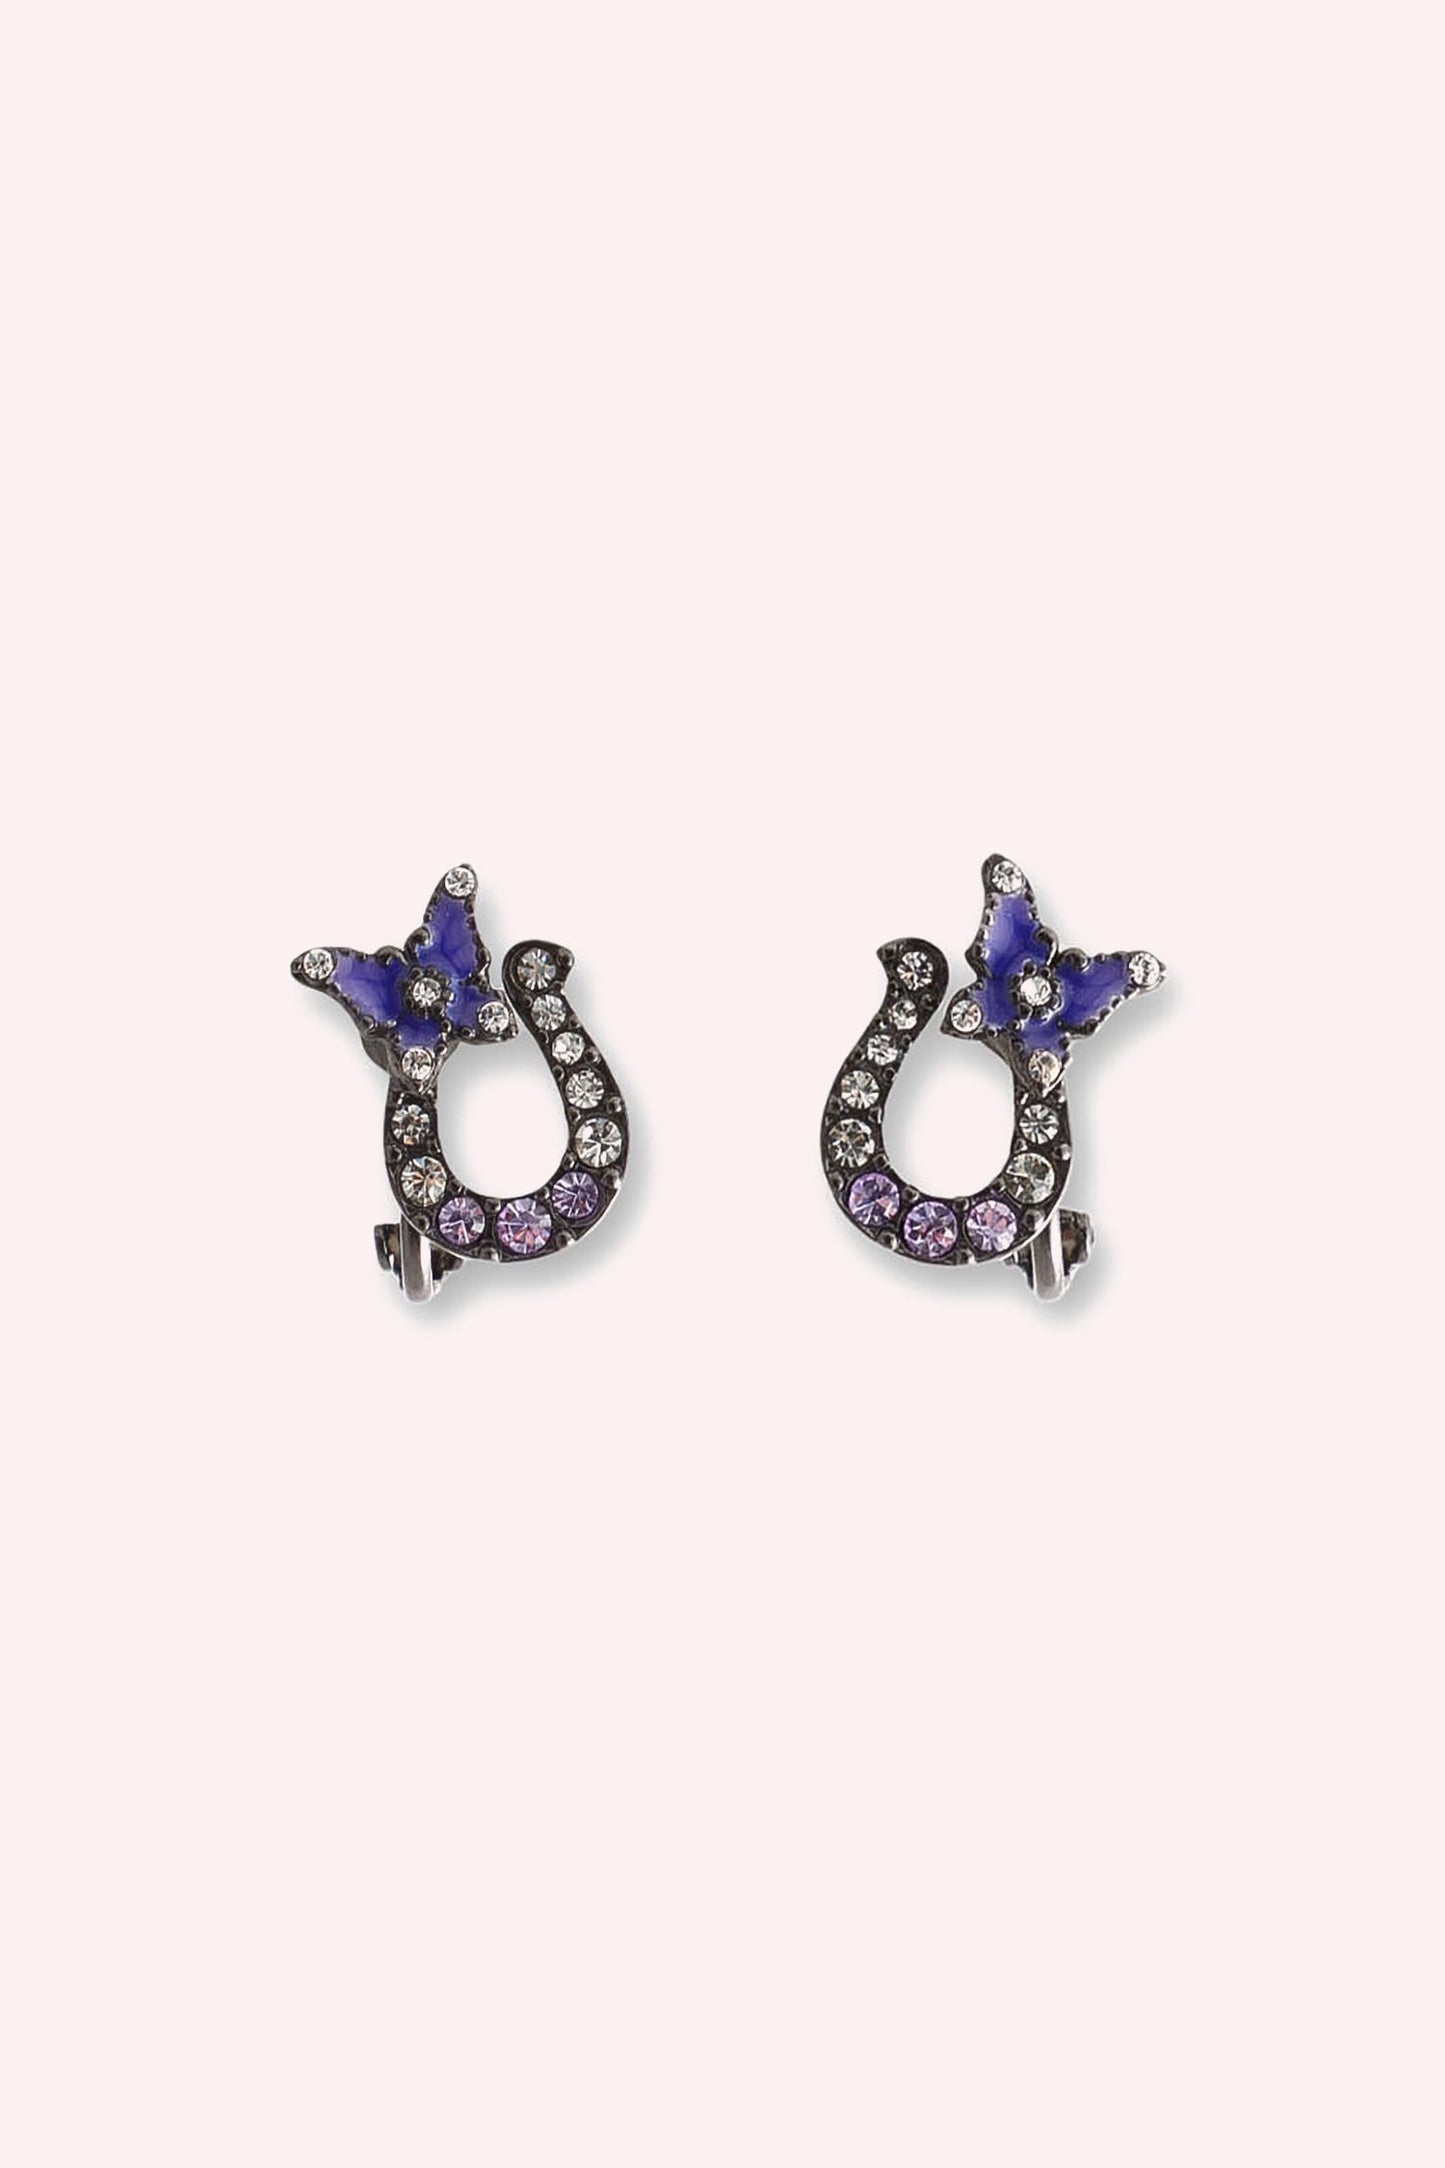 Gunmetal horseshoe Earrings with a butterfly on top, Adorned with Gems